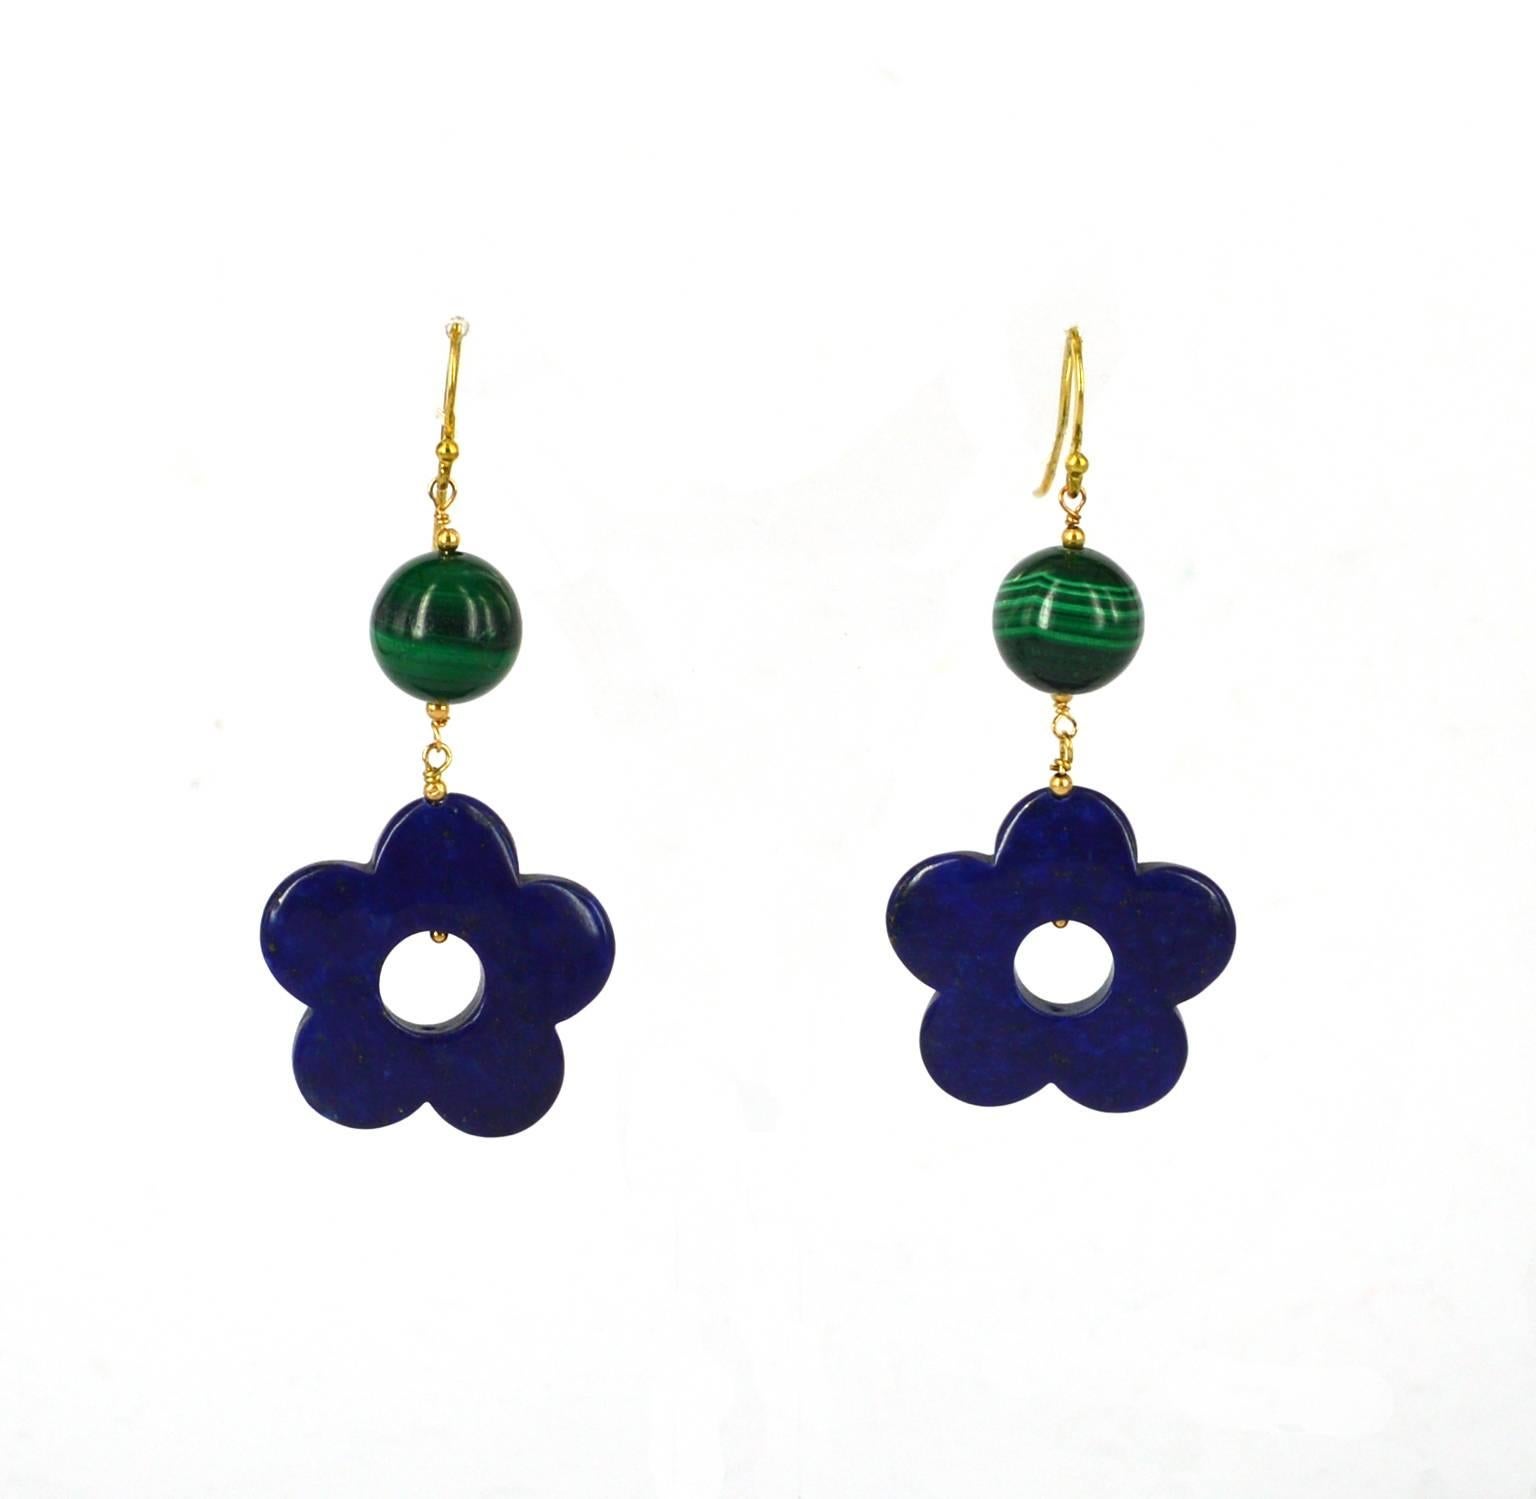 Gorgeous blue and green earrings. Natural Lapis flower bead and natural Malachite round with 14k gold filled.
Hangs 6cm

28mm lapis flower bead
12mm polished malachite bead

All gemstone are natural and have natural inclusions.